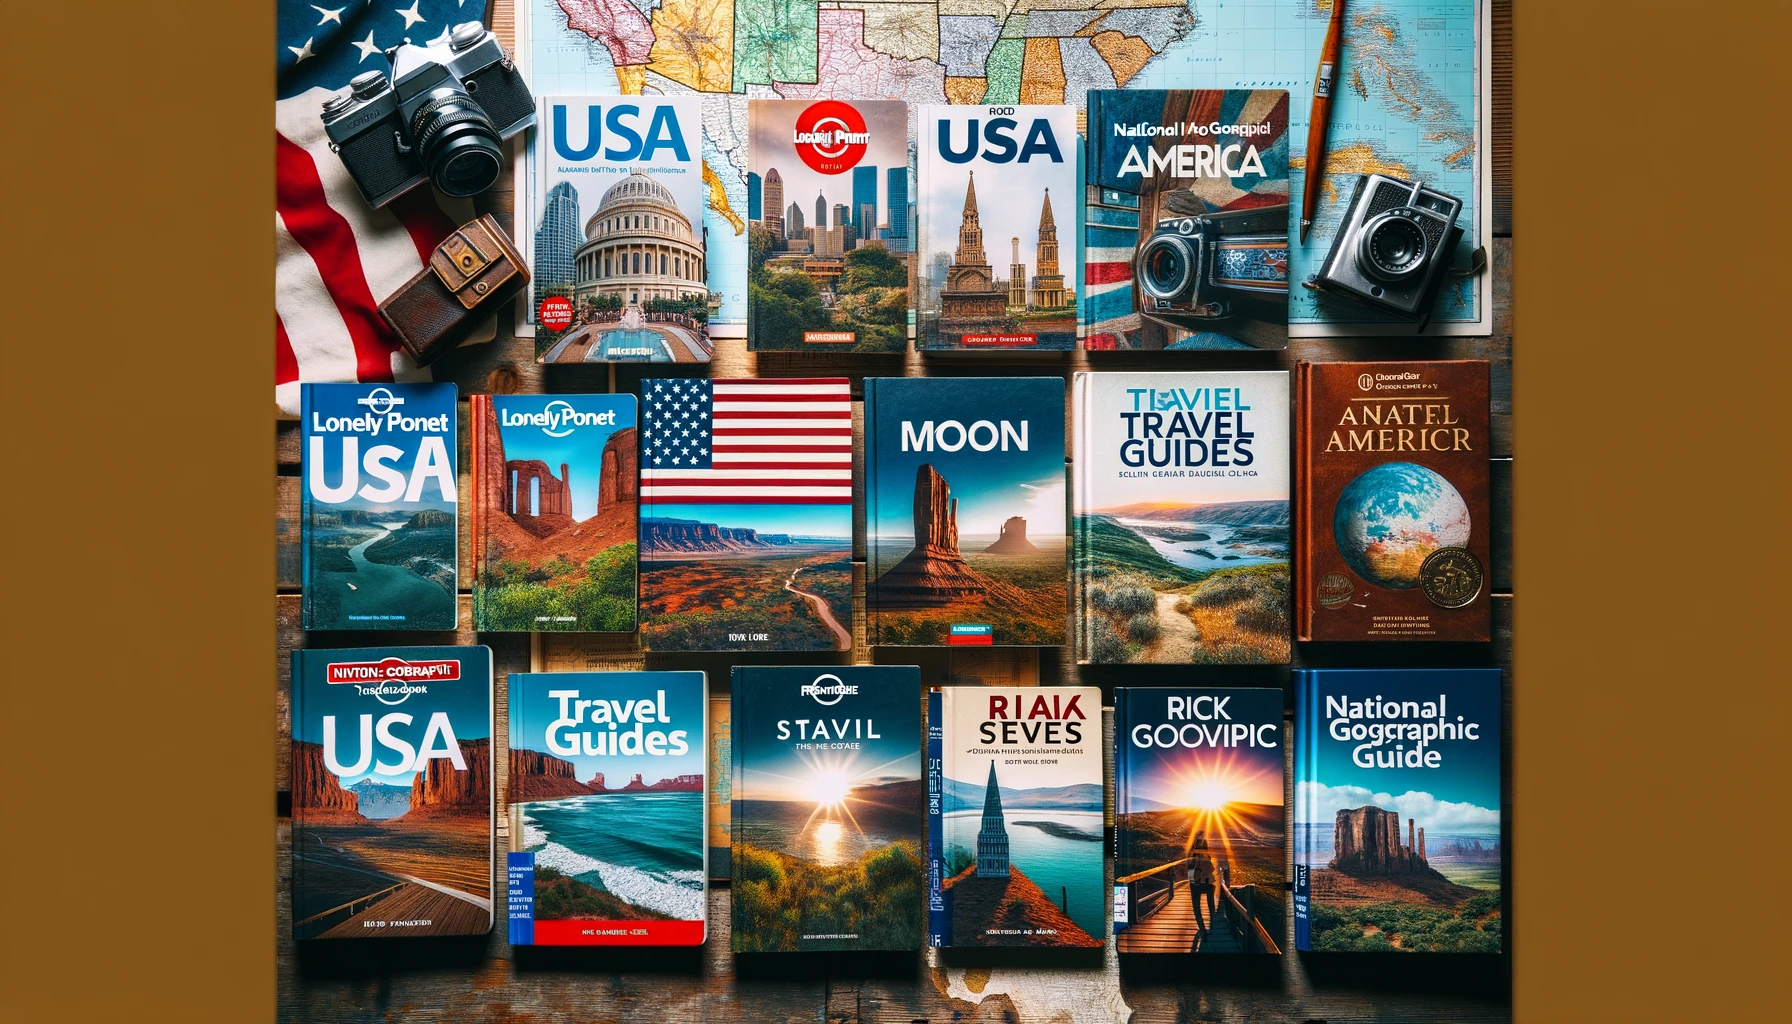 Discover America’s Top Travel Guides